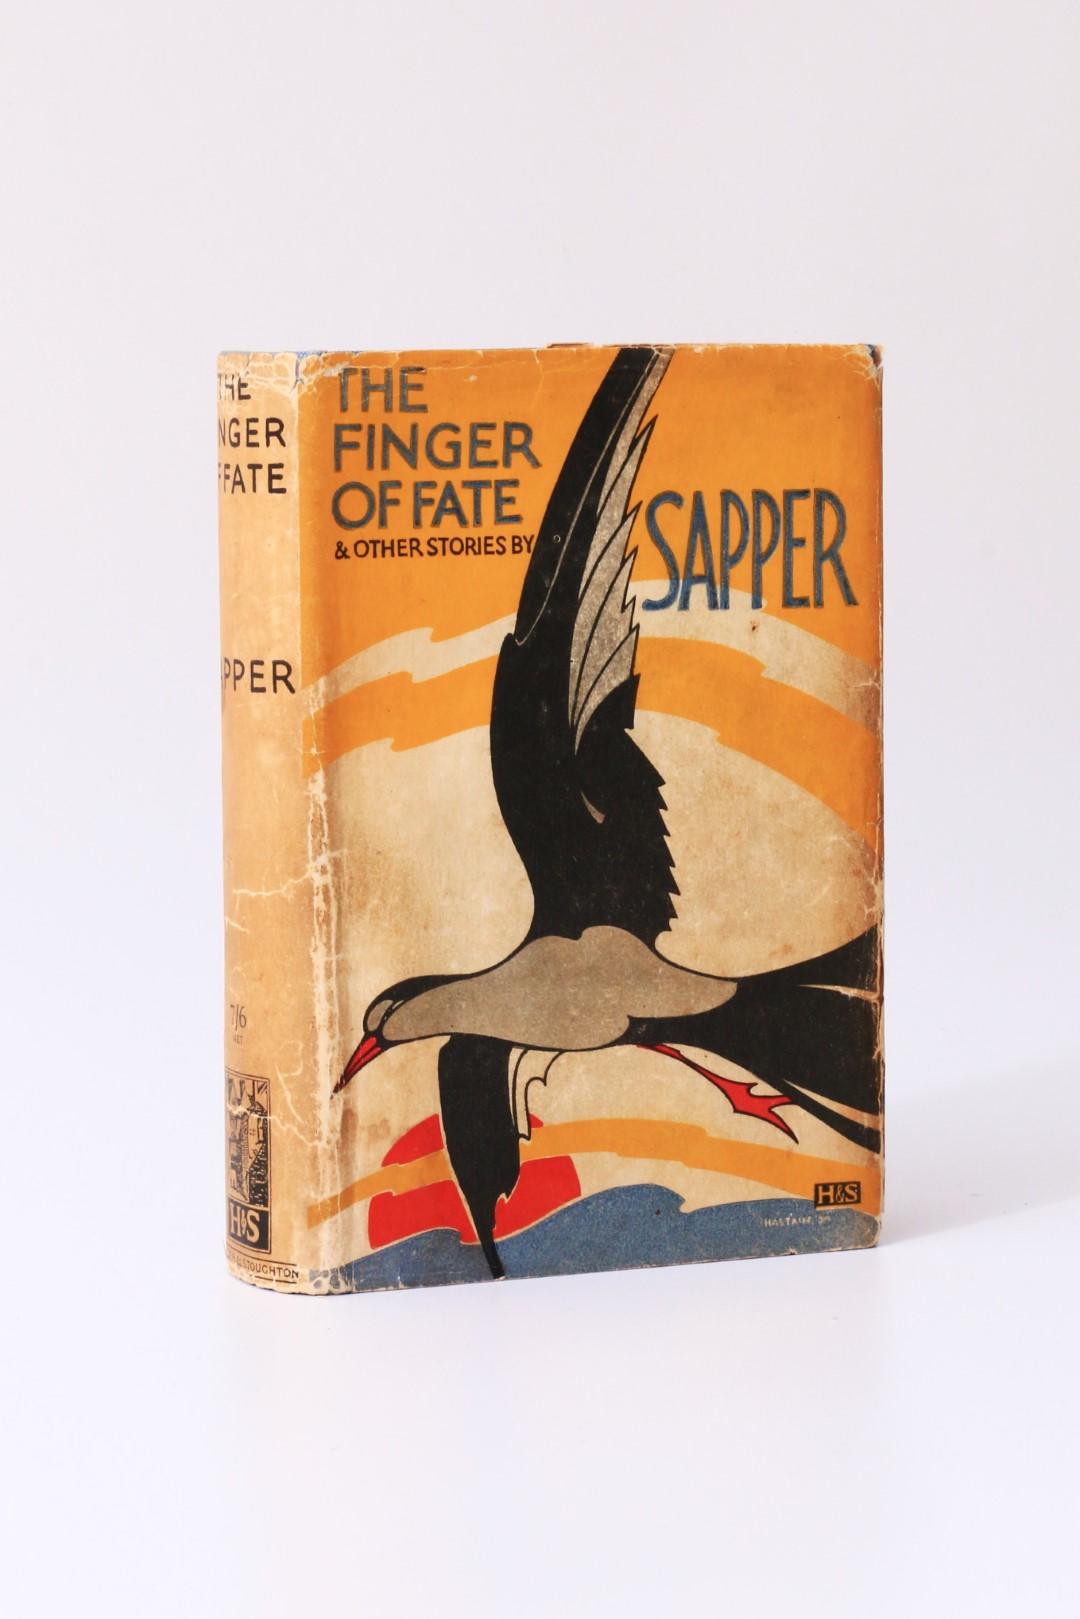 Sapper - The Finger of Fate & Other Stories - Hodder & Stoughton, 1930, First Edition.